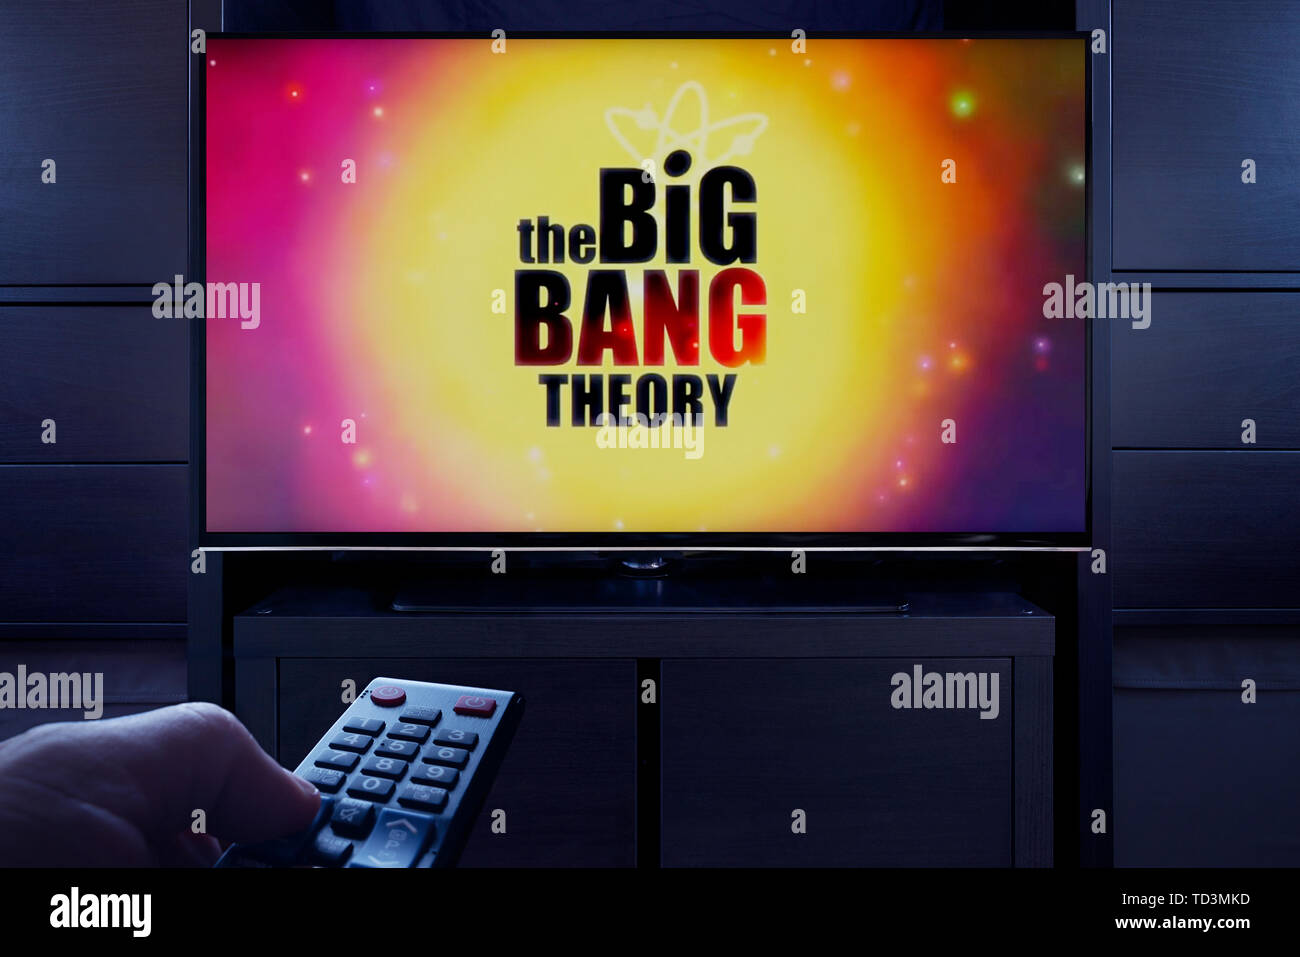 A man points a TV remote at the television which displays the Big Bang Theory main title screen (Editorial use only). Stock Photo